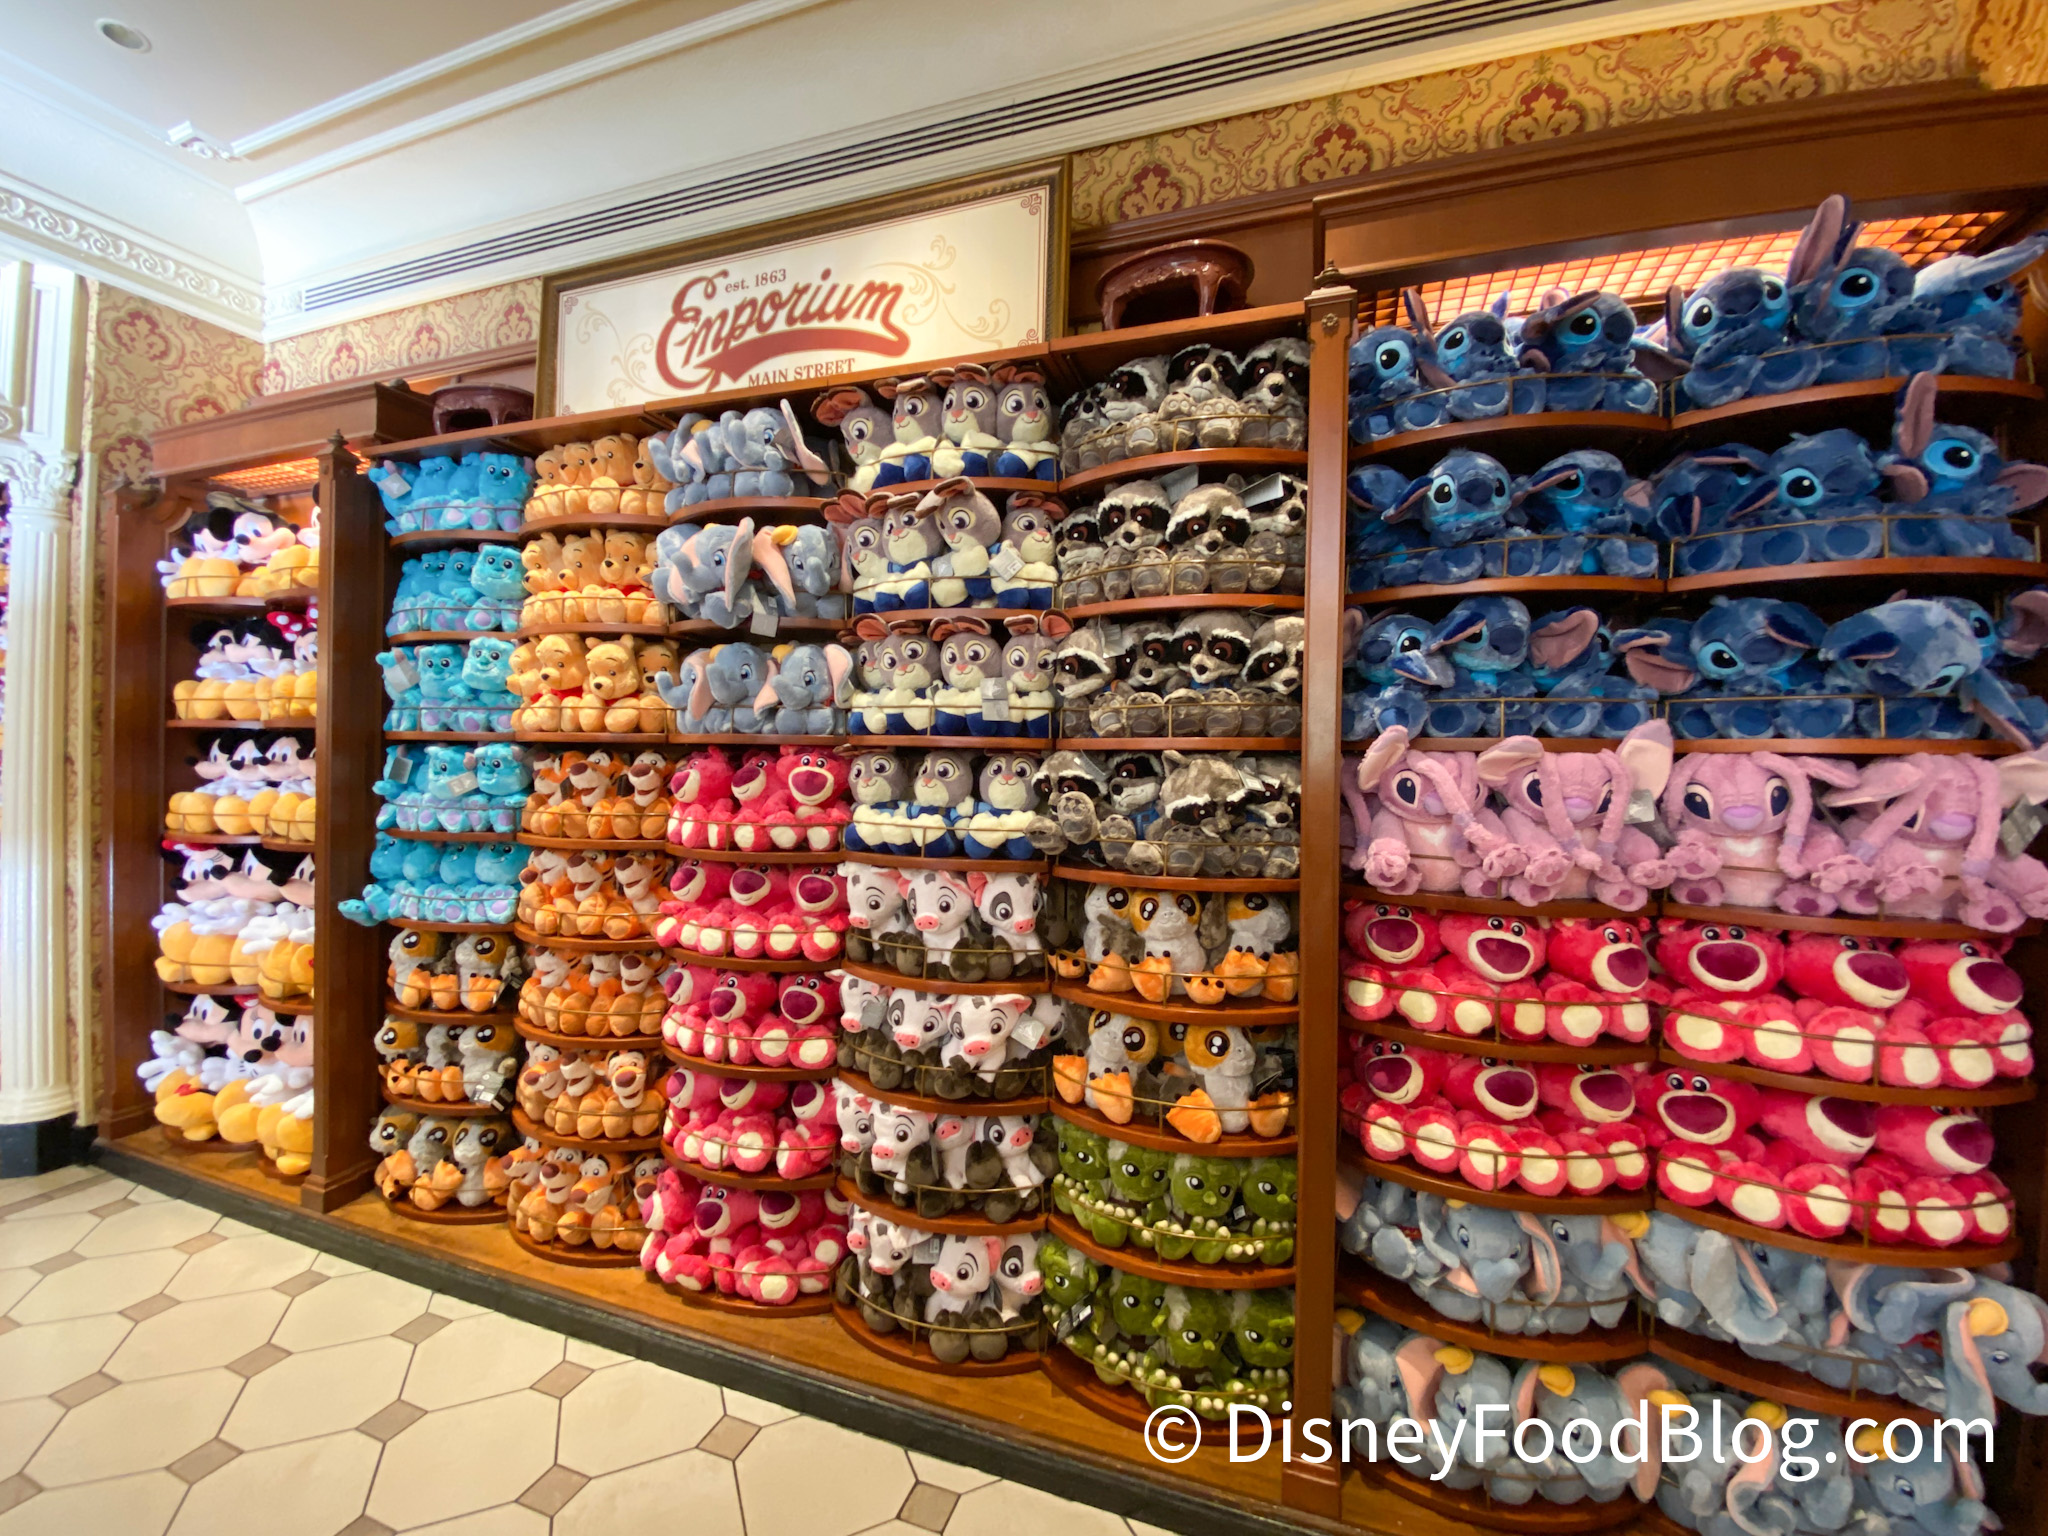 Nordstrom is Selling OLD Disney Souvenirs for Ridiculously High Prices!